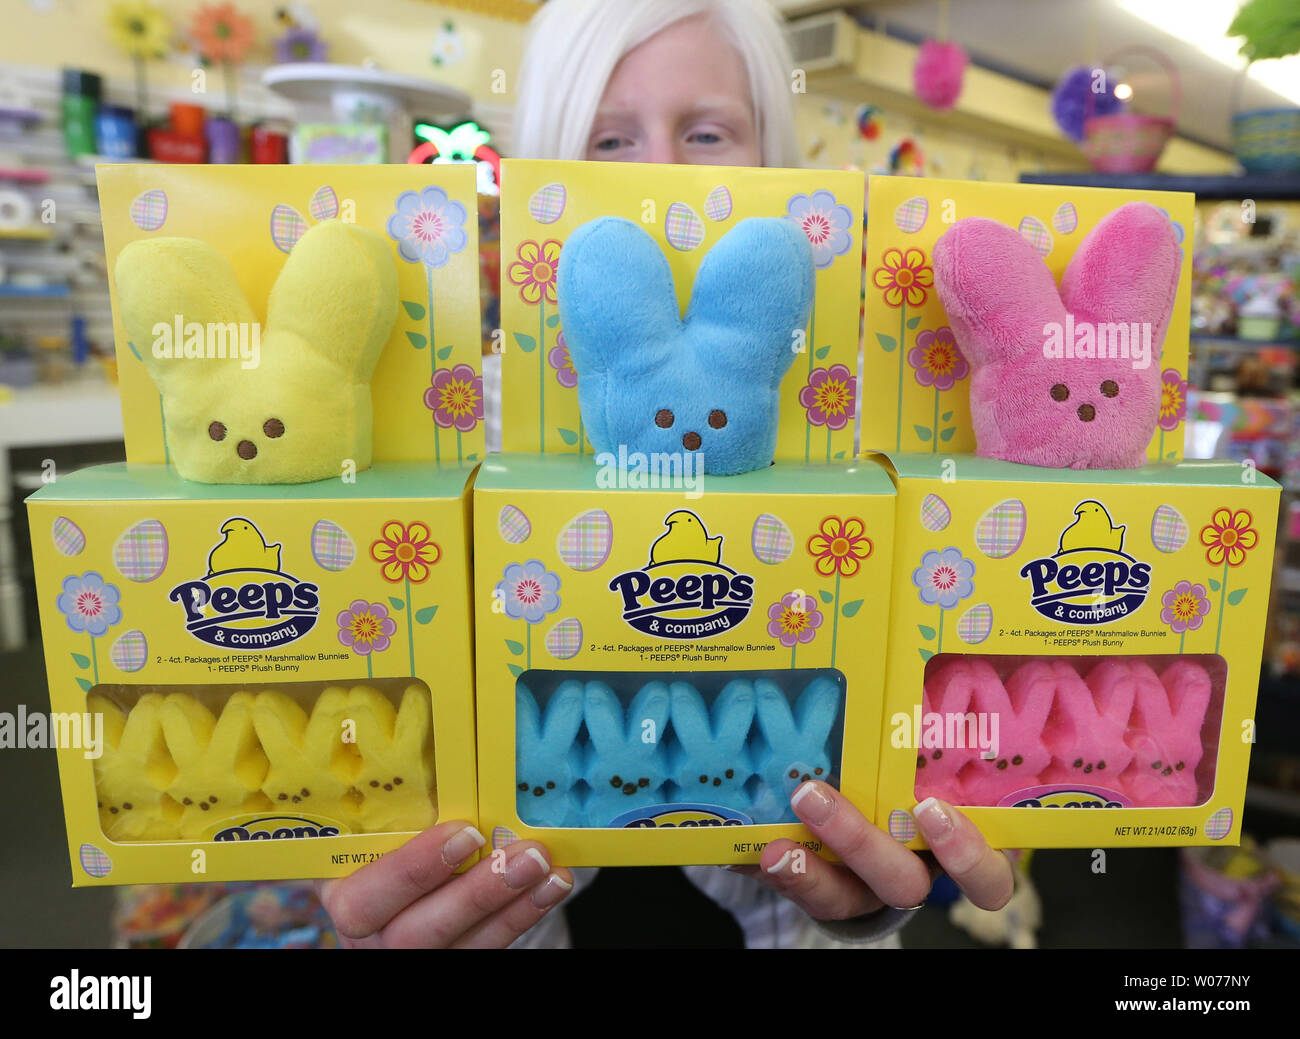 Saleswoman Mandy Puchel displays a new version of the popular candy Peeps that includes a stuffed animal at Sweet Be's Candy and Gifts in Des Peres, Missouri on March 27, 2013. Sales for stuffed animals, candy and toys have been brisk as Easter approaches on March 31.     UPI/Bill Greenblatt Stock Photo